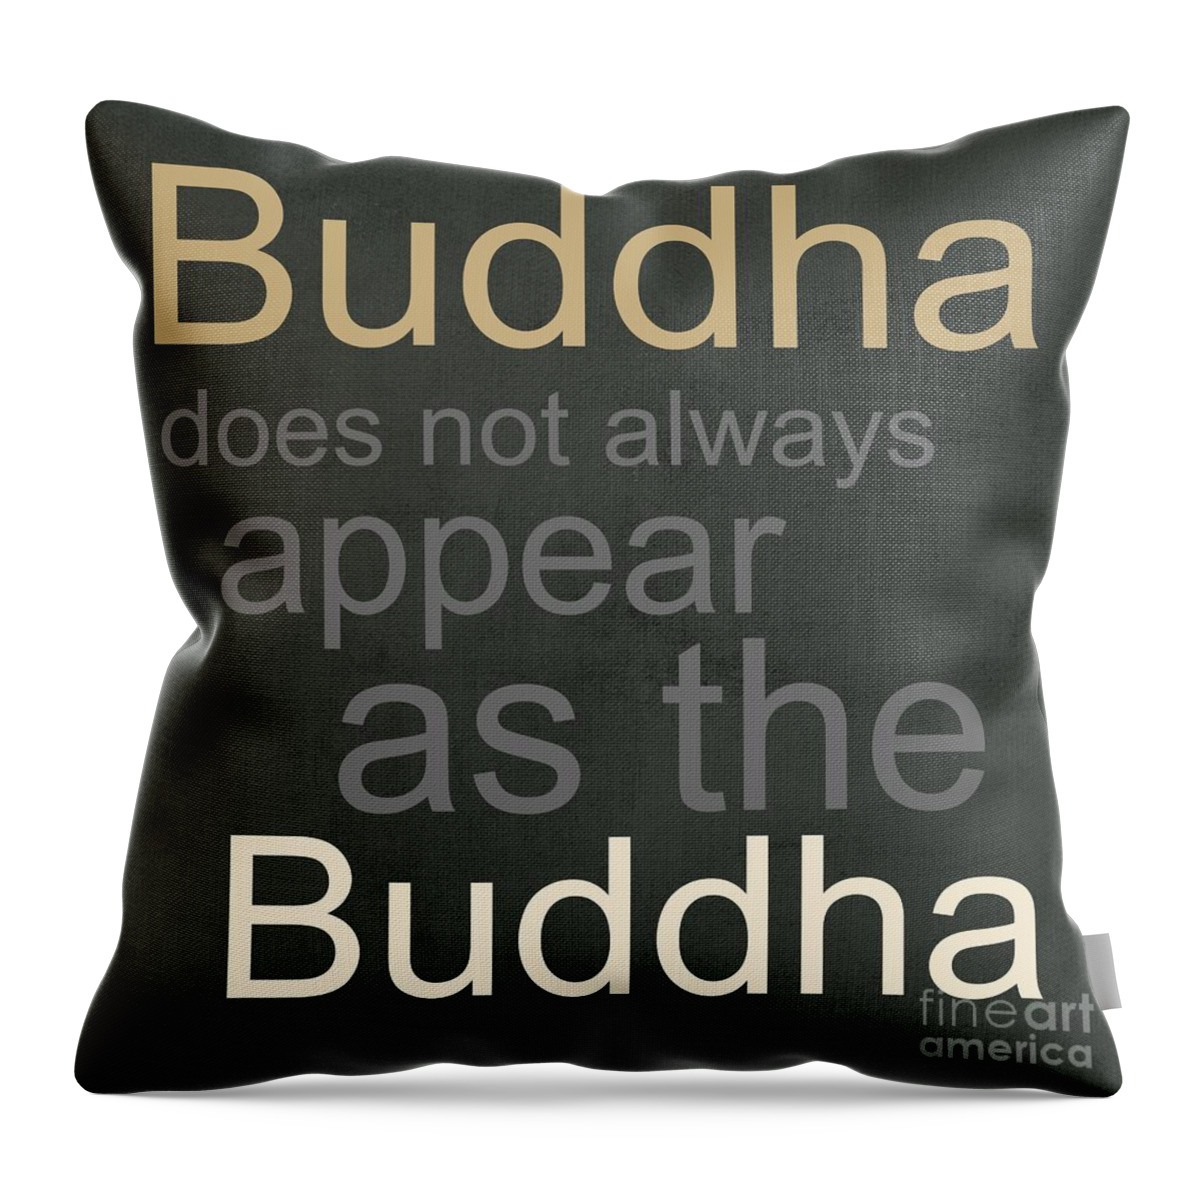 Buddha Throw Pillow featuring the mixed media Buddha by Linda Woods